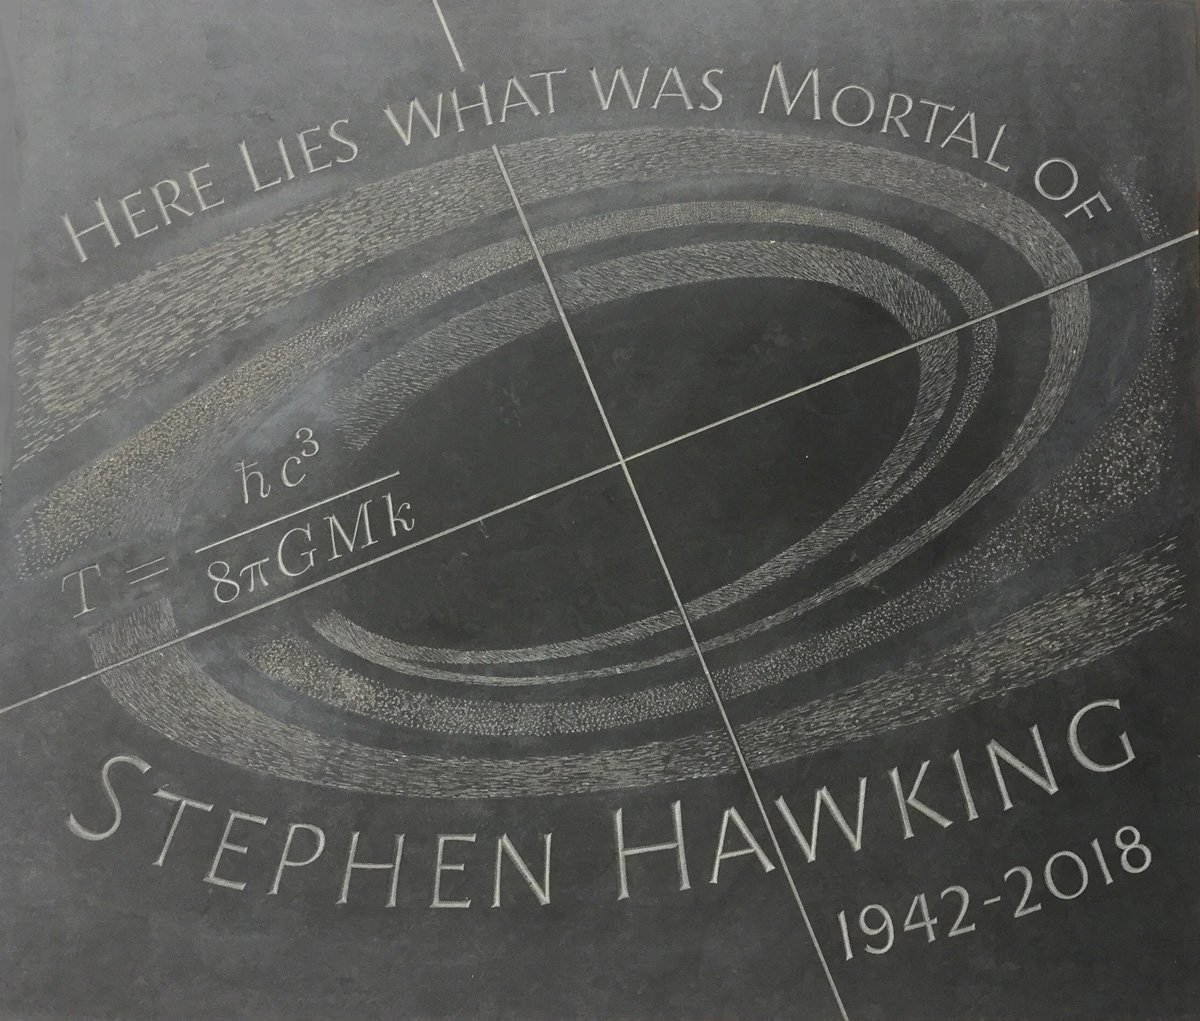 Beautiful memorial stone for #StephenHawking bearing his equally beautiful equation for the temperature of #HawkingRadiation at @wabbey, where his ashes will be buried alongside Sir Isaac Newton and close to the other equation-bearing memorial to Paul Dirac. #RequiescatInPace